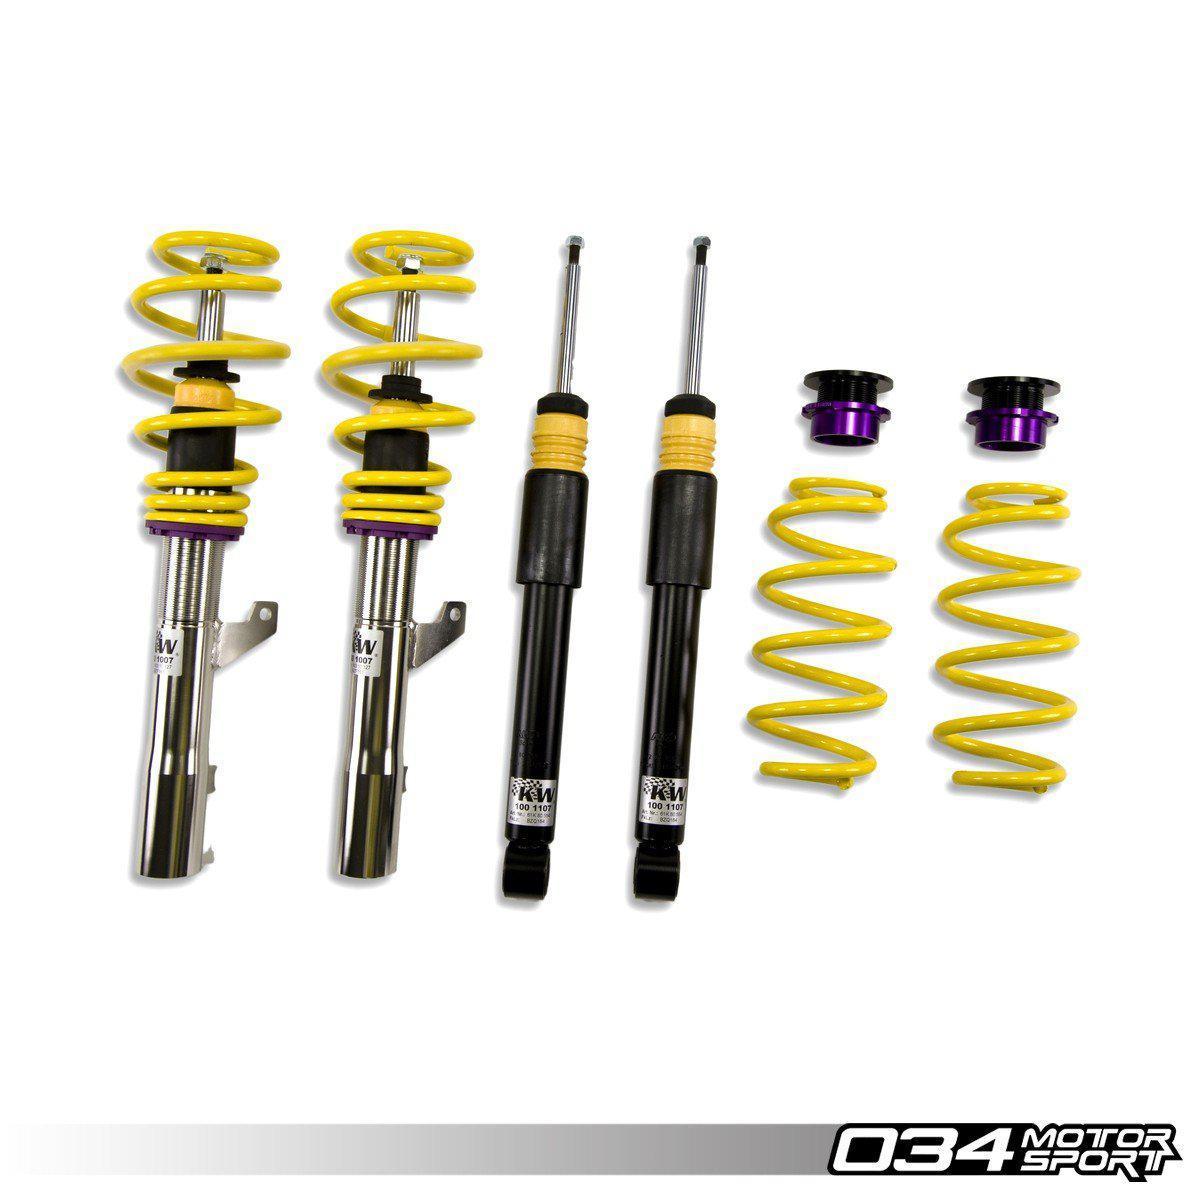 KW Variant 2 Coilover Suspension, 8p Audi A3 Quattro & B6/B7 Volkswagen Passat With Edc-A Little Tuning Co